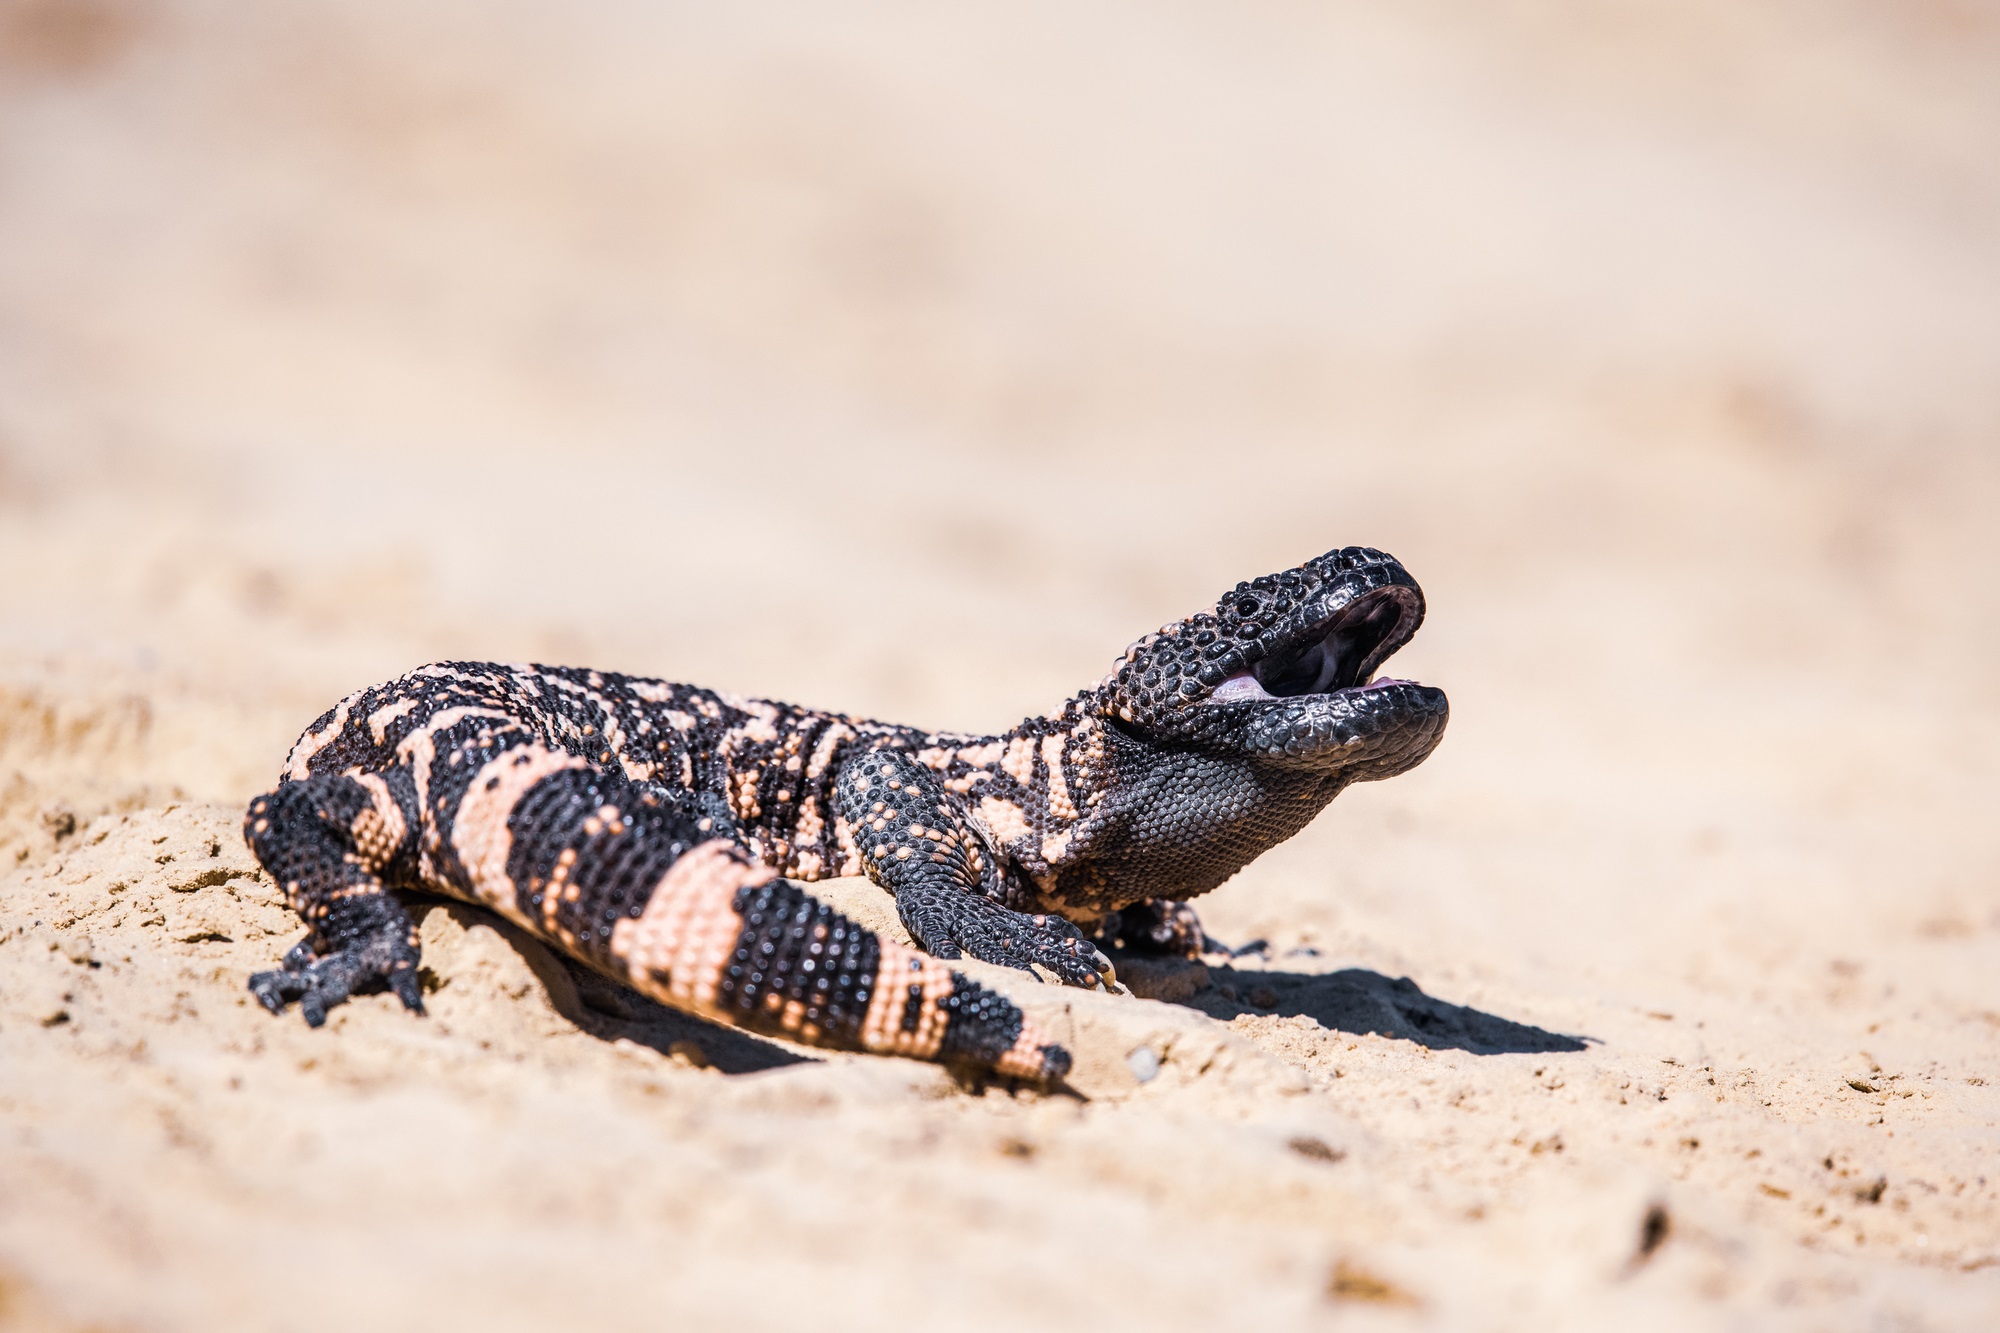 Gila monster lizard and real-life dragon hissing in the desert